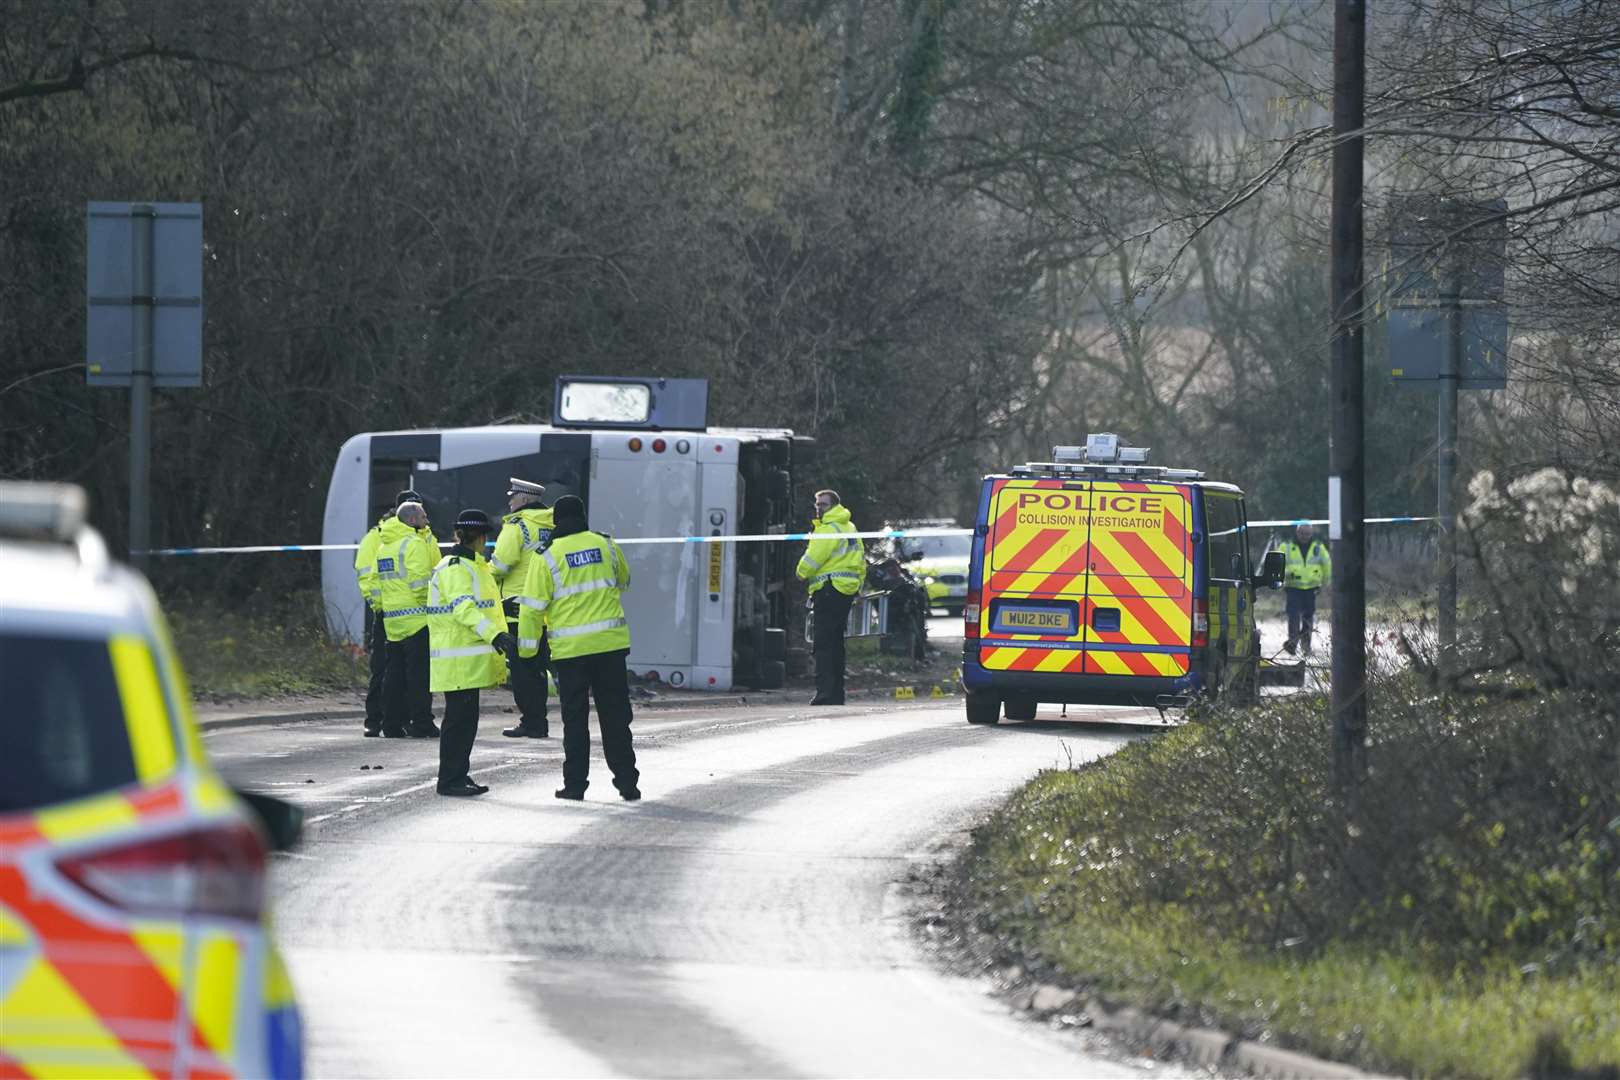 Police at the scene on the A39 Quantock Road in Bridgwater after a double-decker bus overturned in a crash involving a motorcycle. (Andrew Matthews/PA)